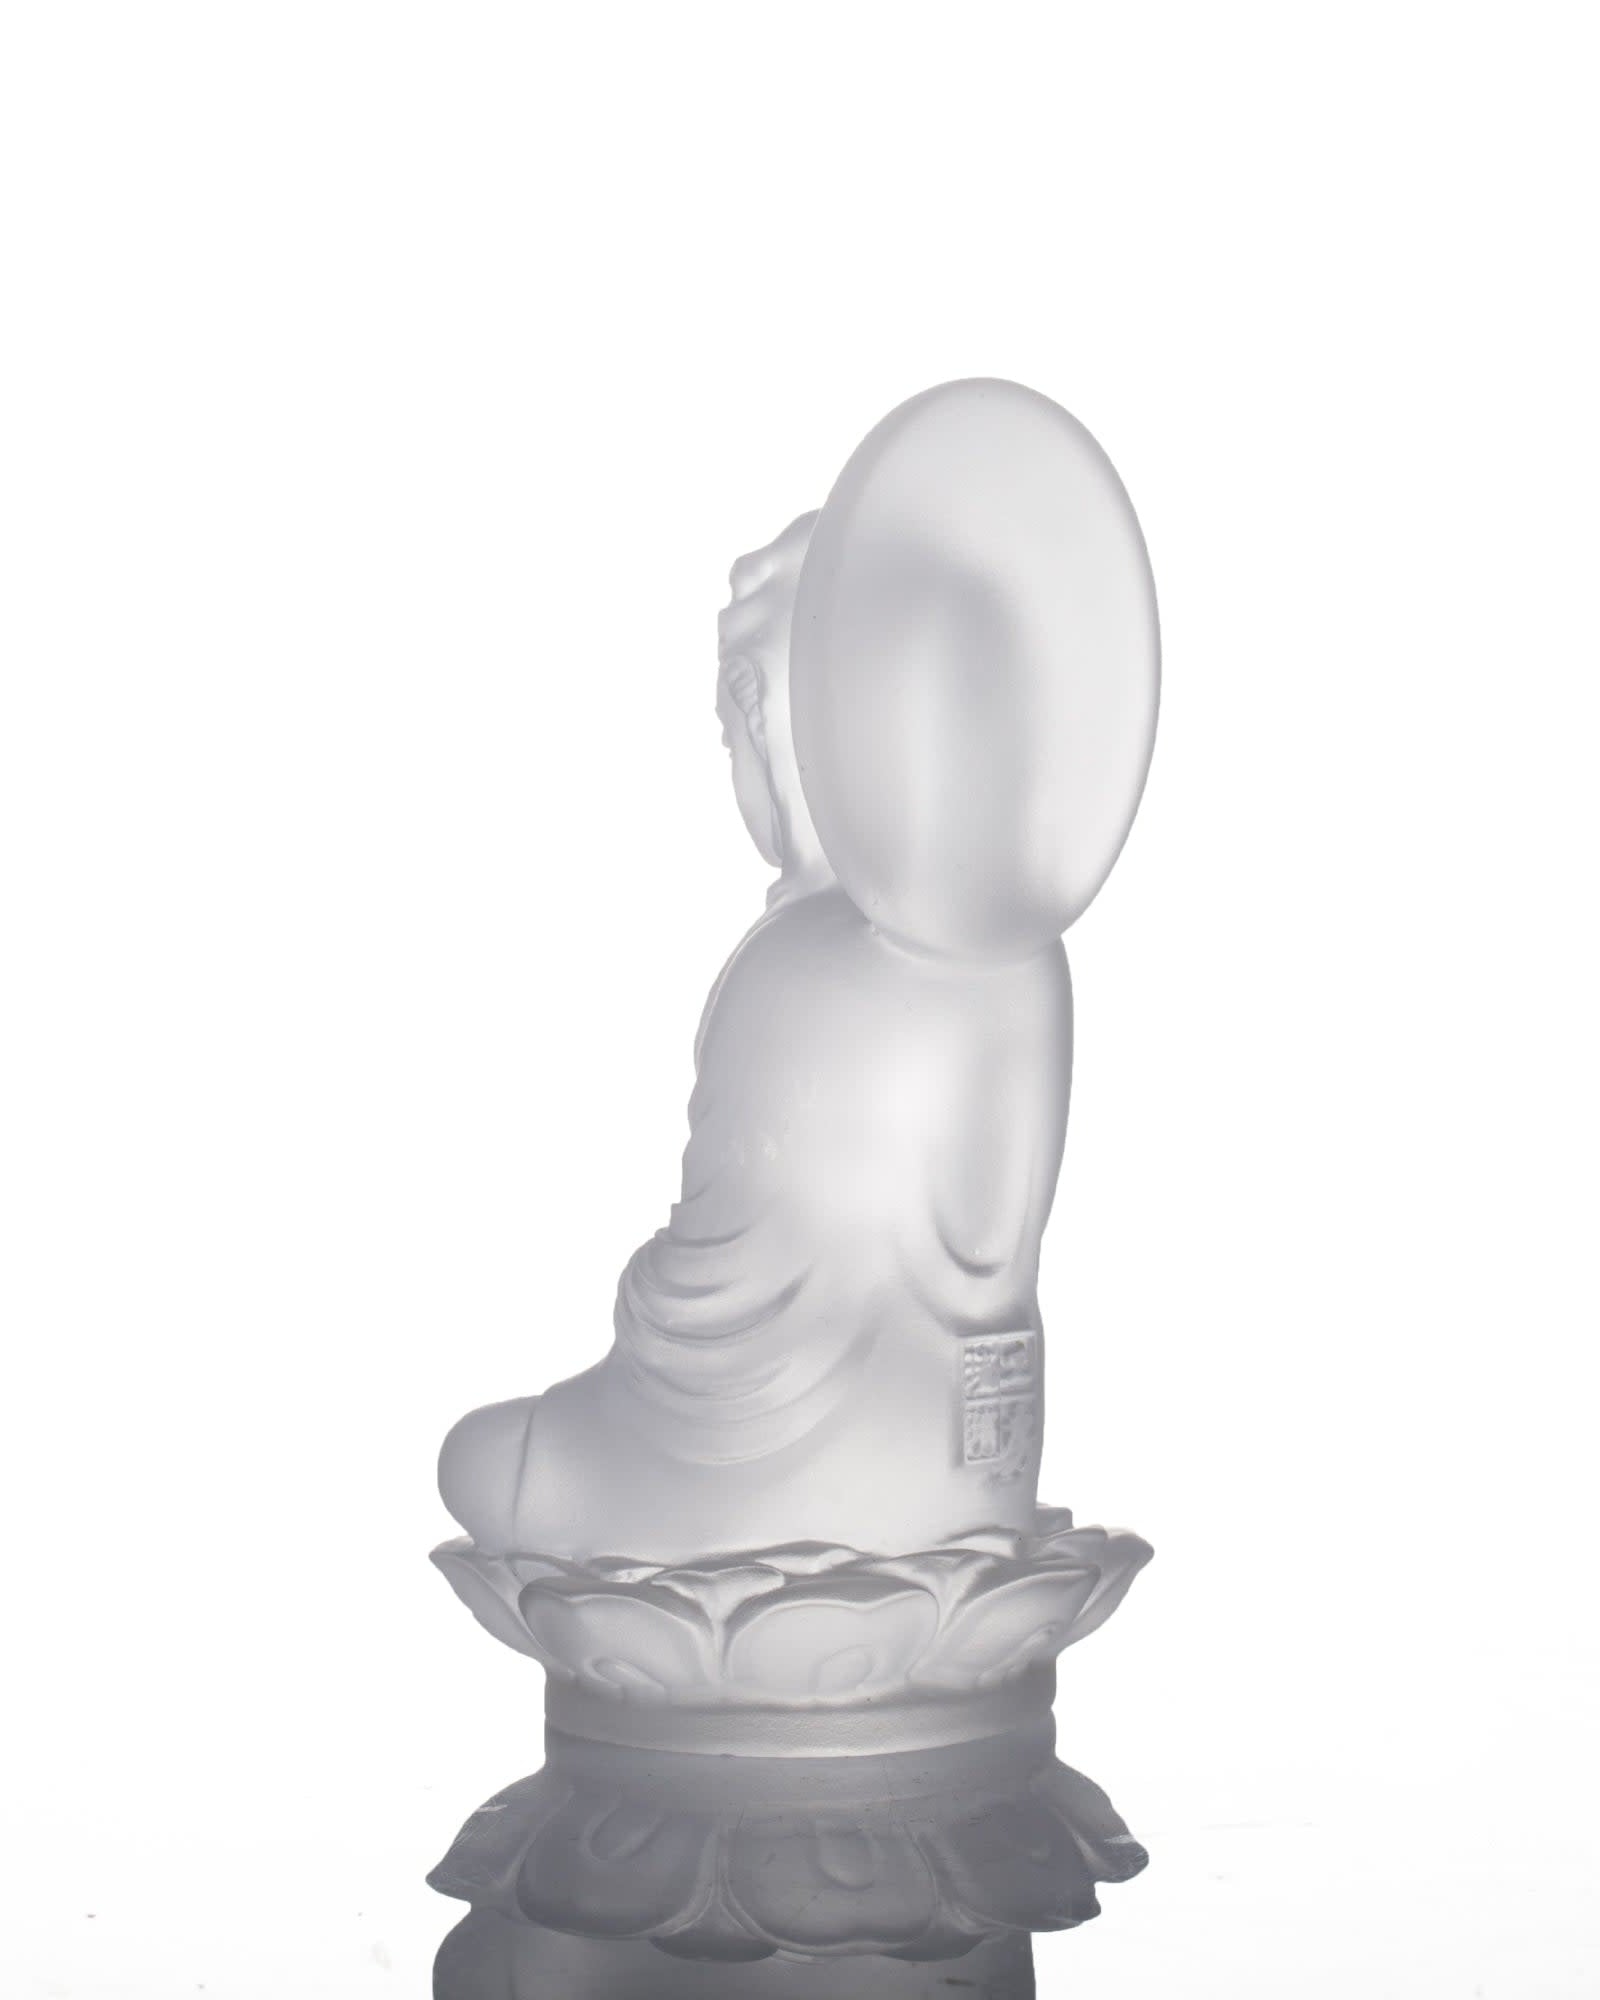 LIULI Crystal Art Crystal Guanyin Sculpture, "Accompanied By Ease + A Happy Excursion Set"